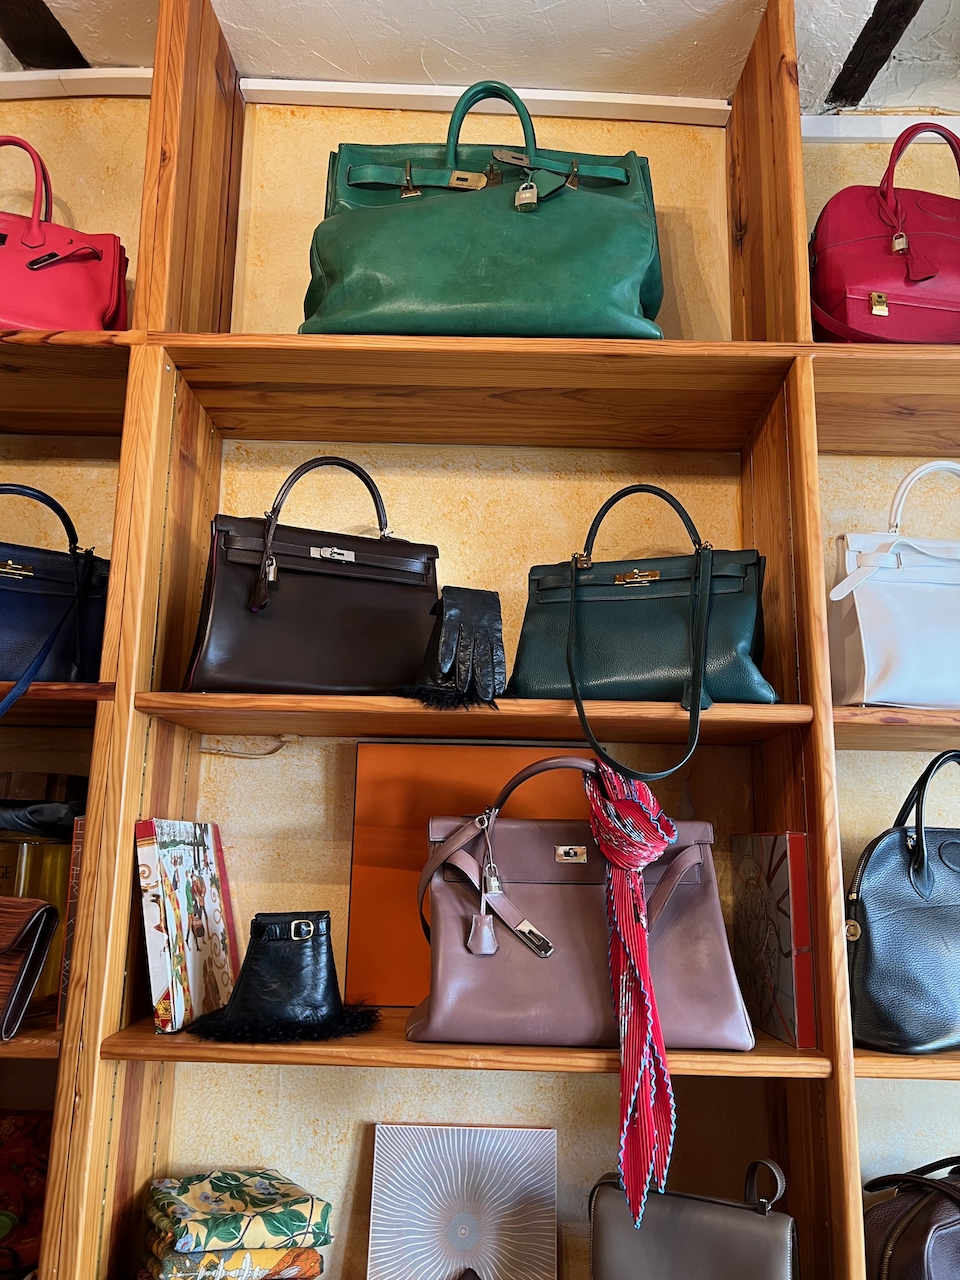 Some more of the bags for sale at Les 3 Marches. Photo via @The_Notorious_Pink